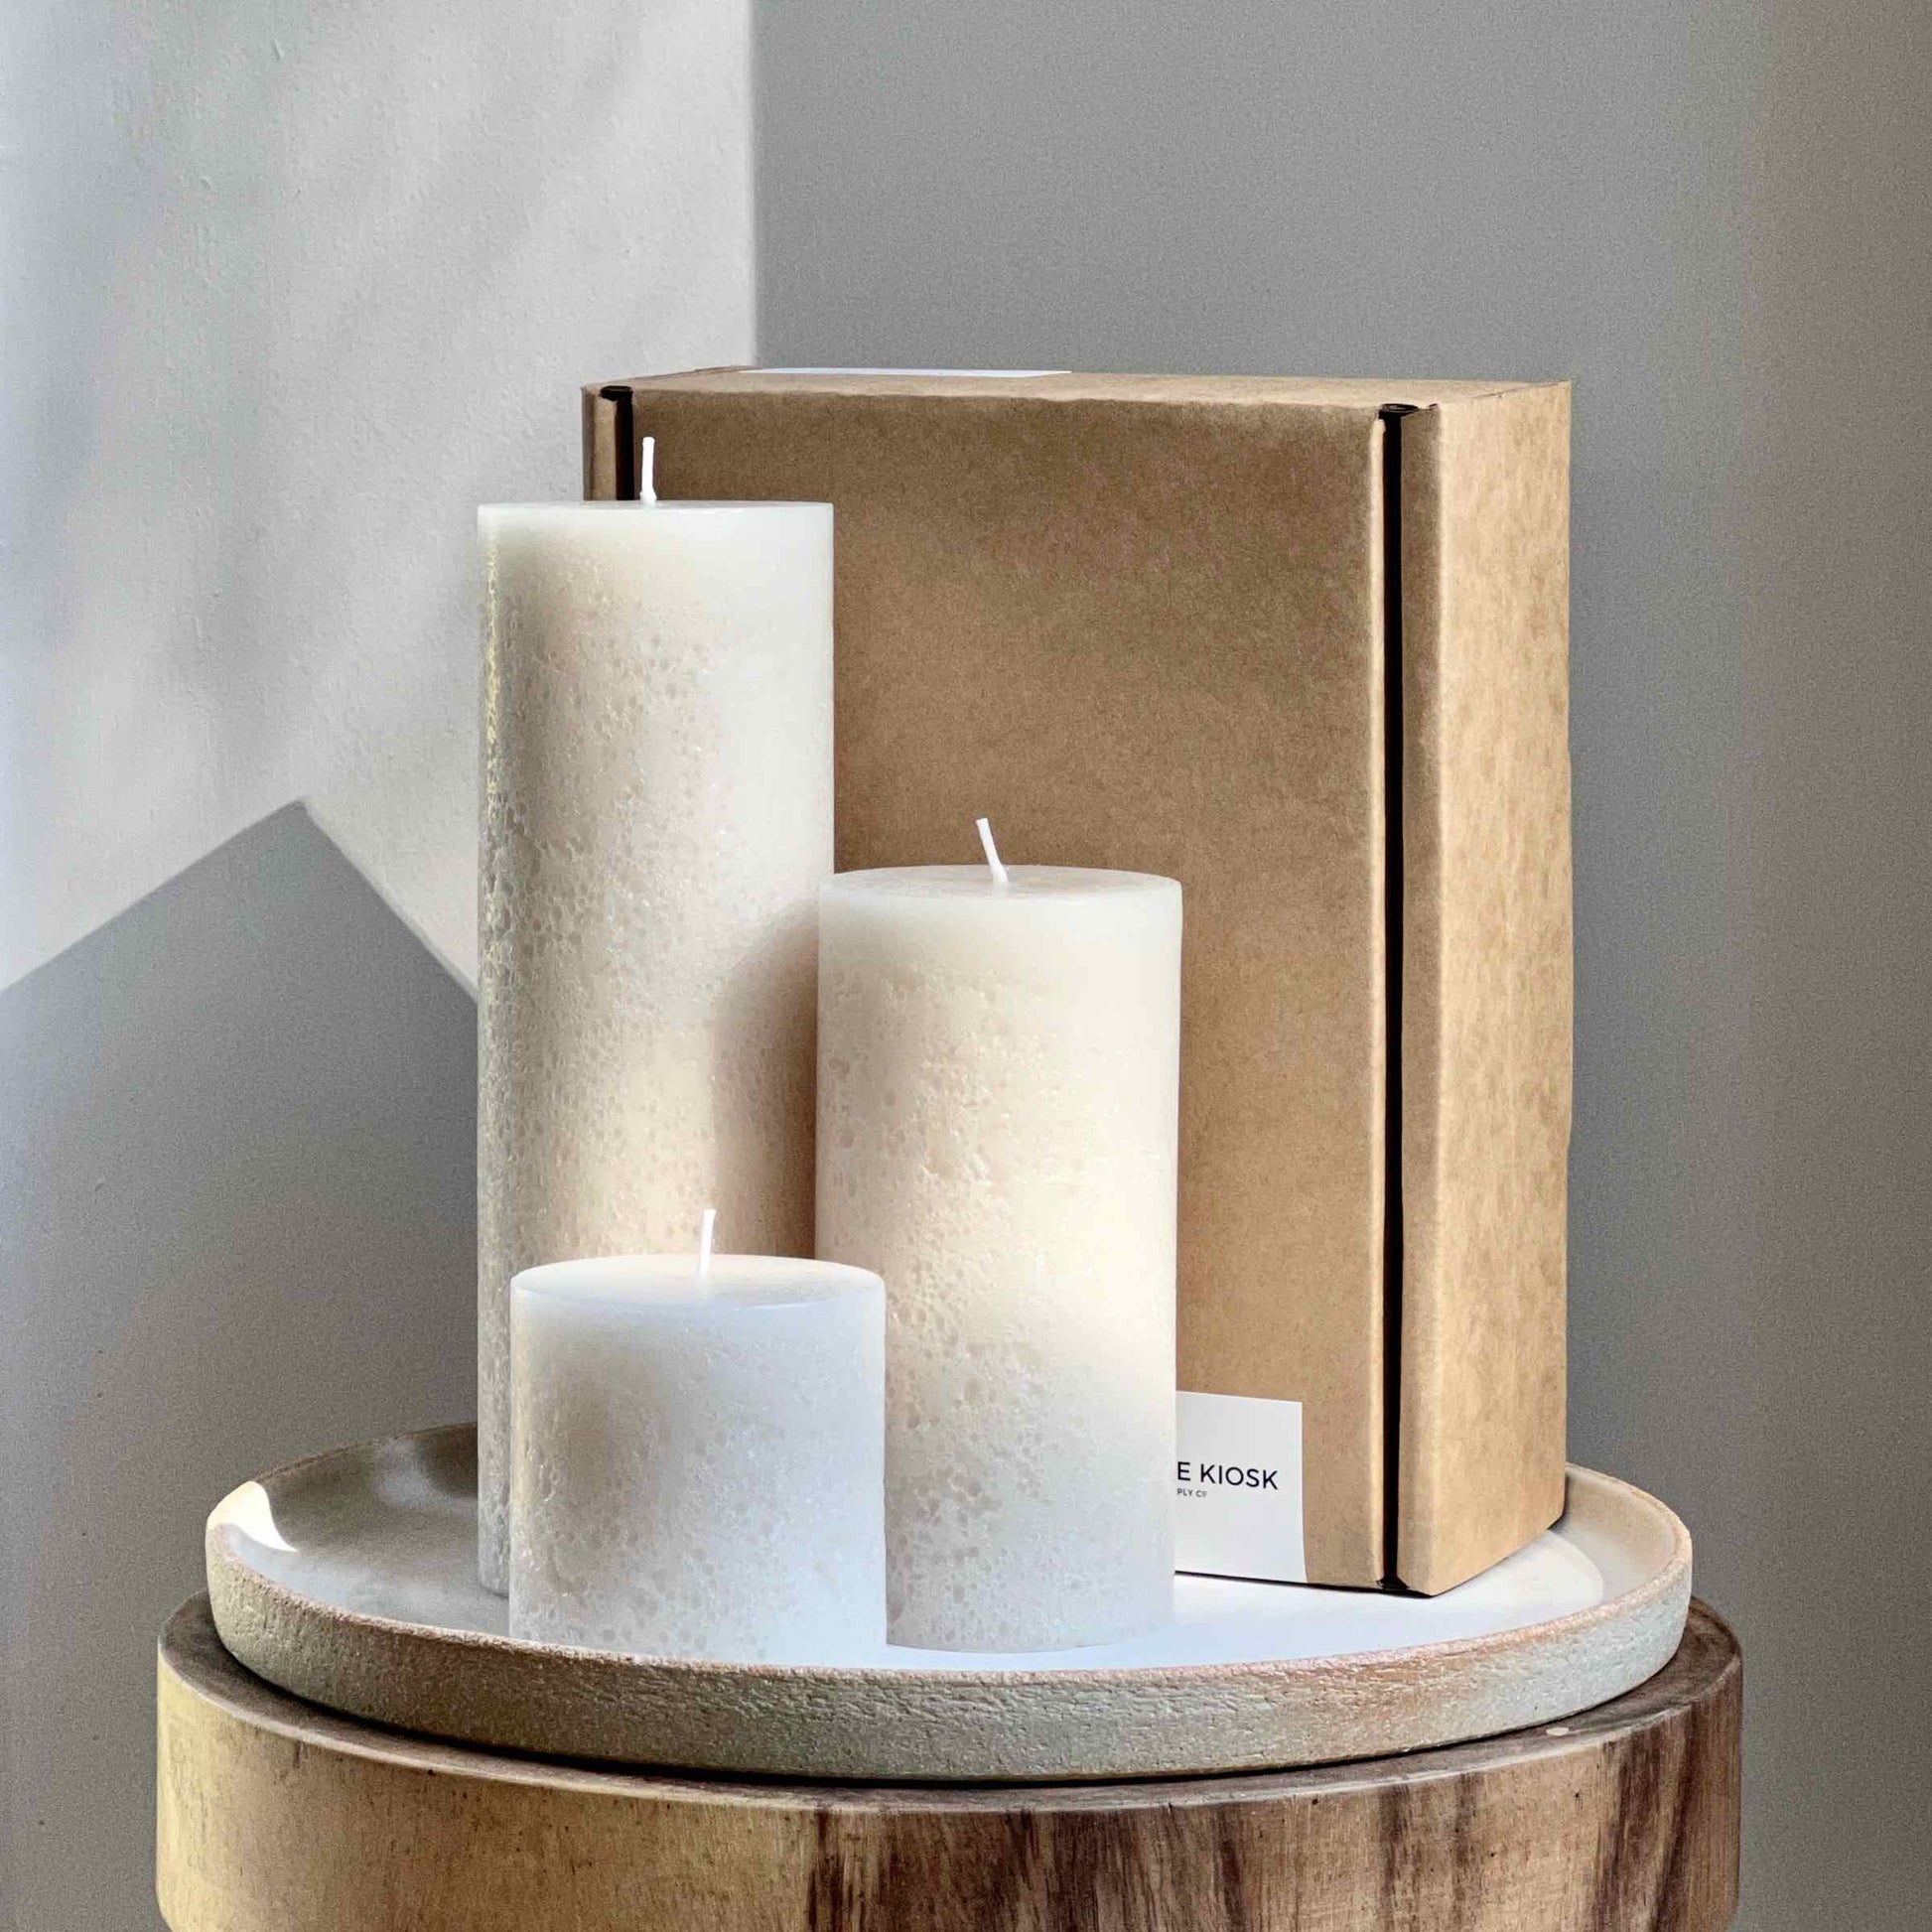 Textured candle gift set